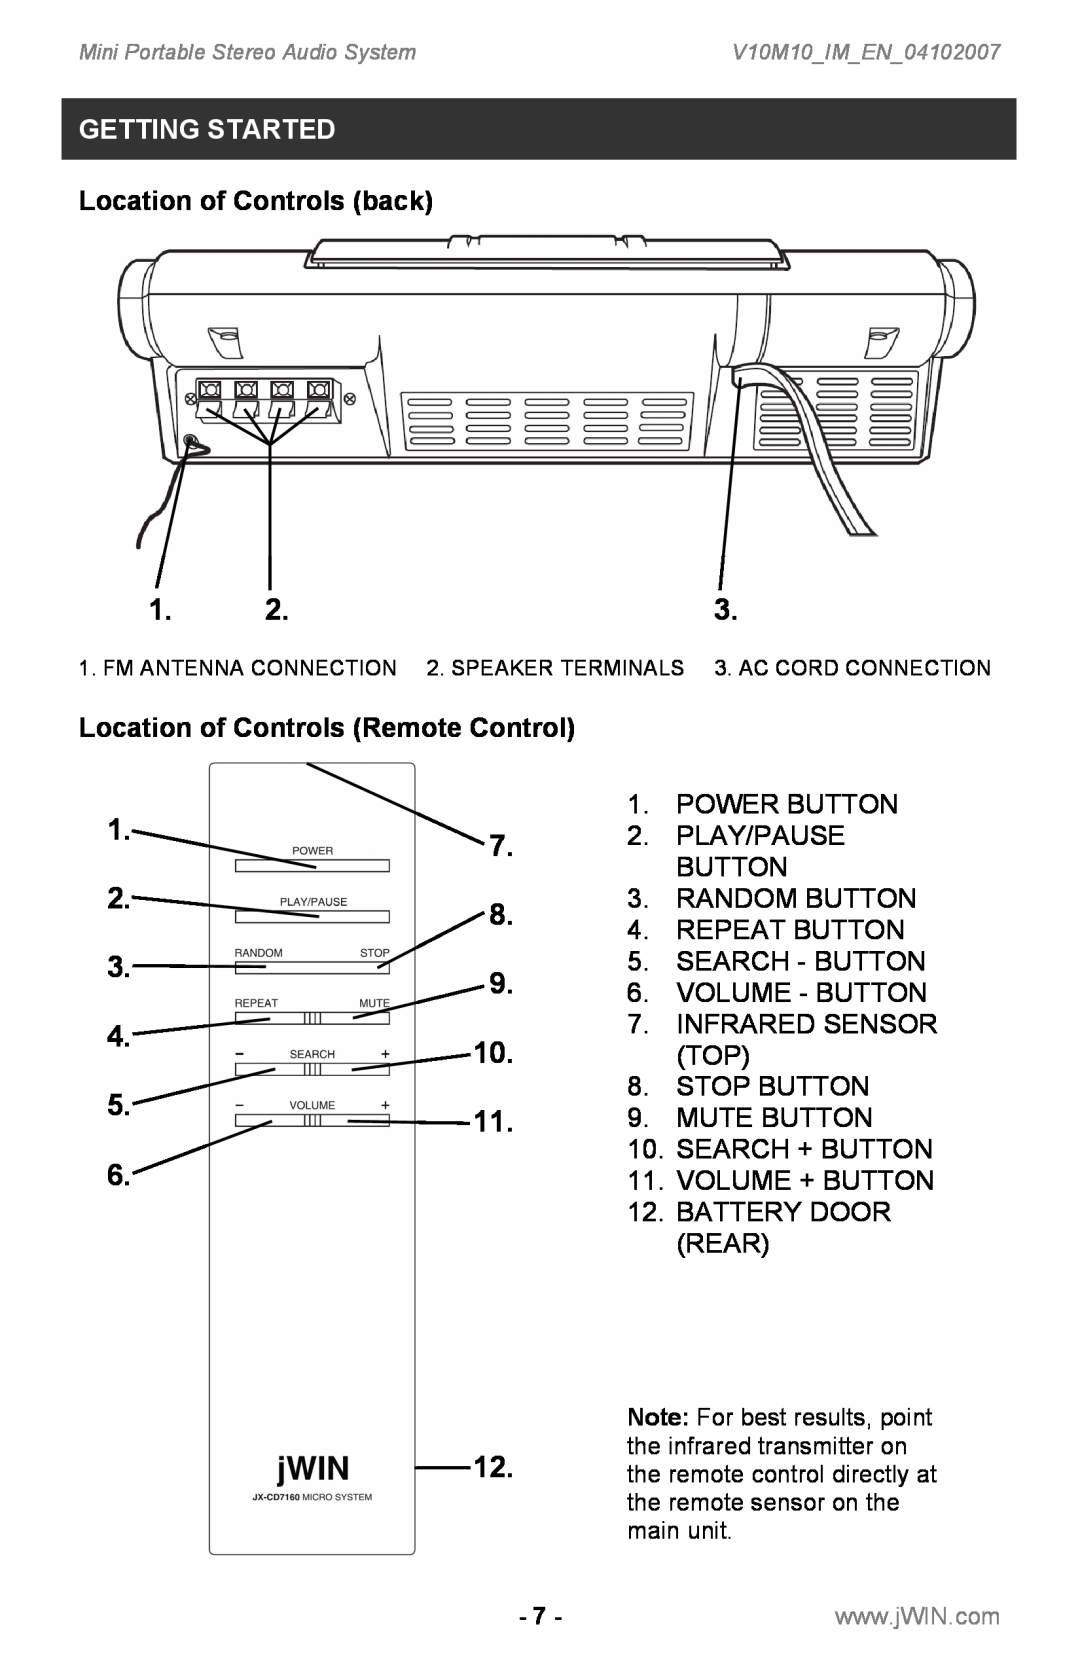 Jwin JX-CD7160 instruction manual Location of Controls back, Location of Controls Remote Control, Getting Started 